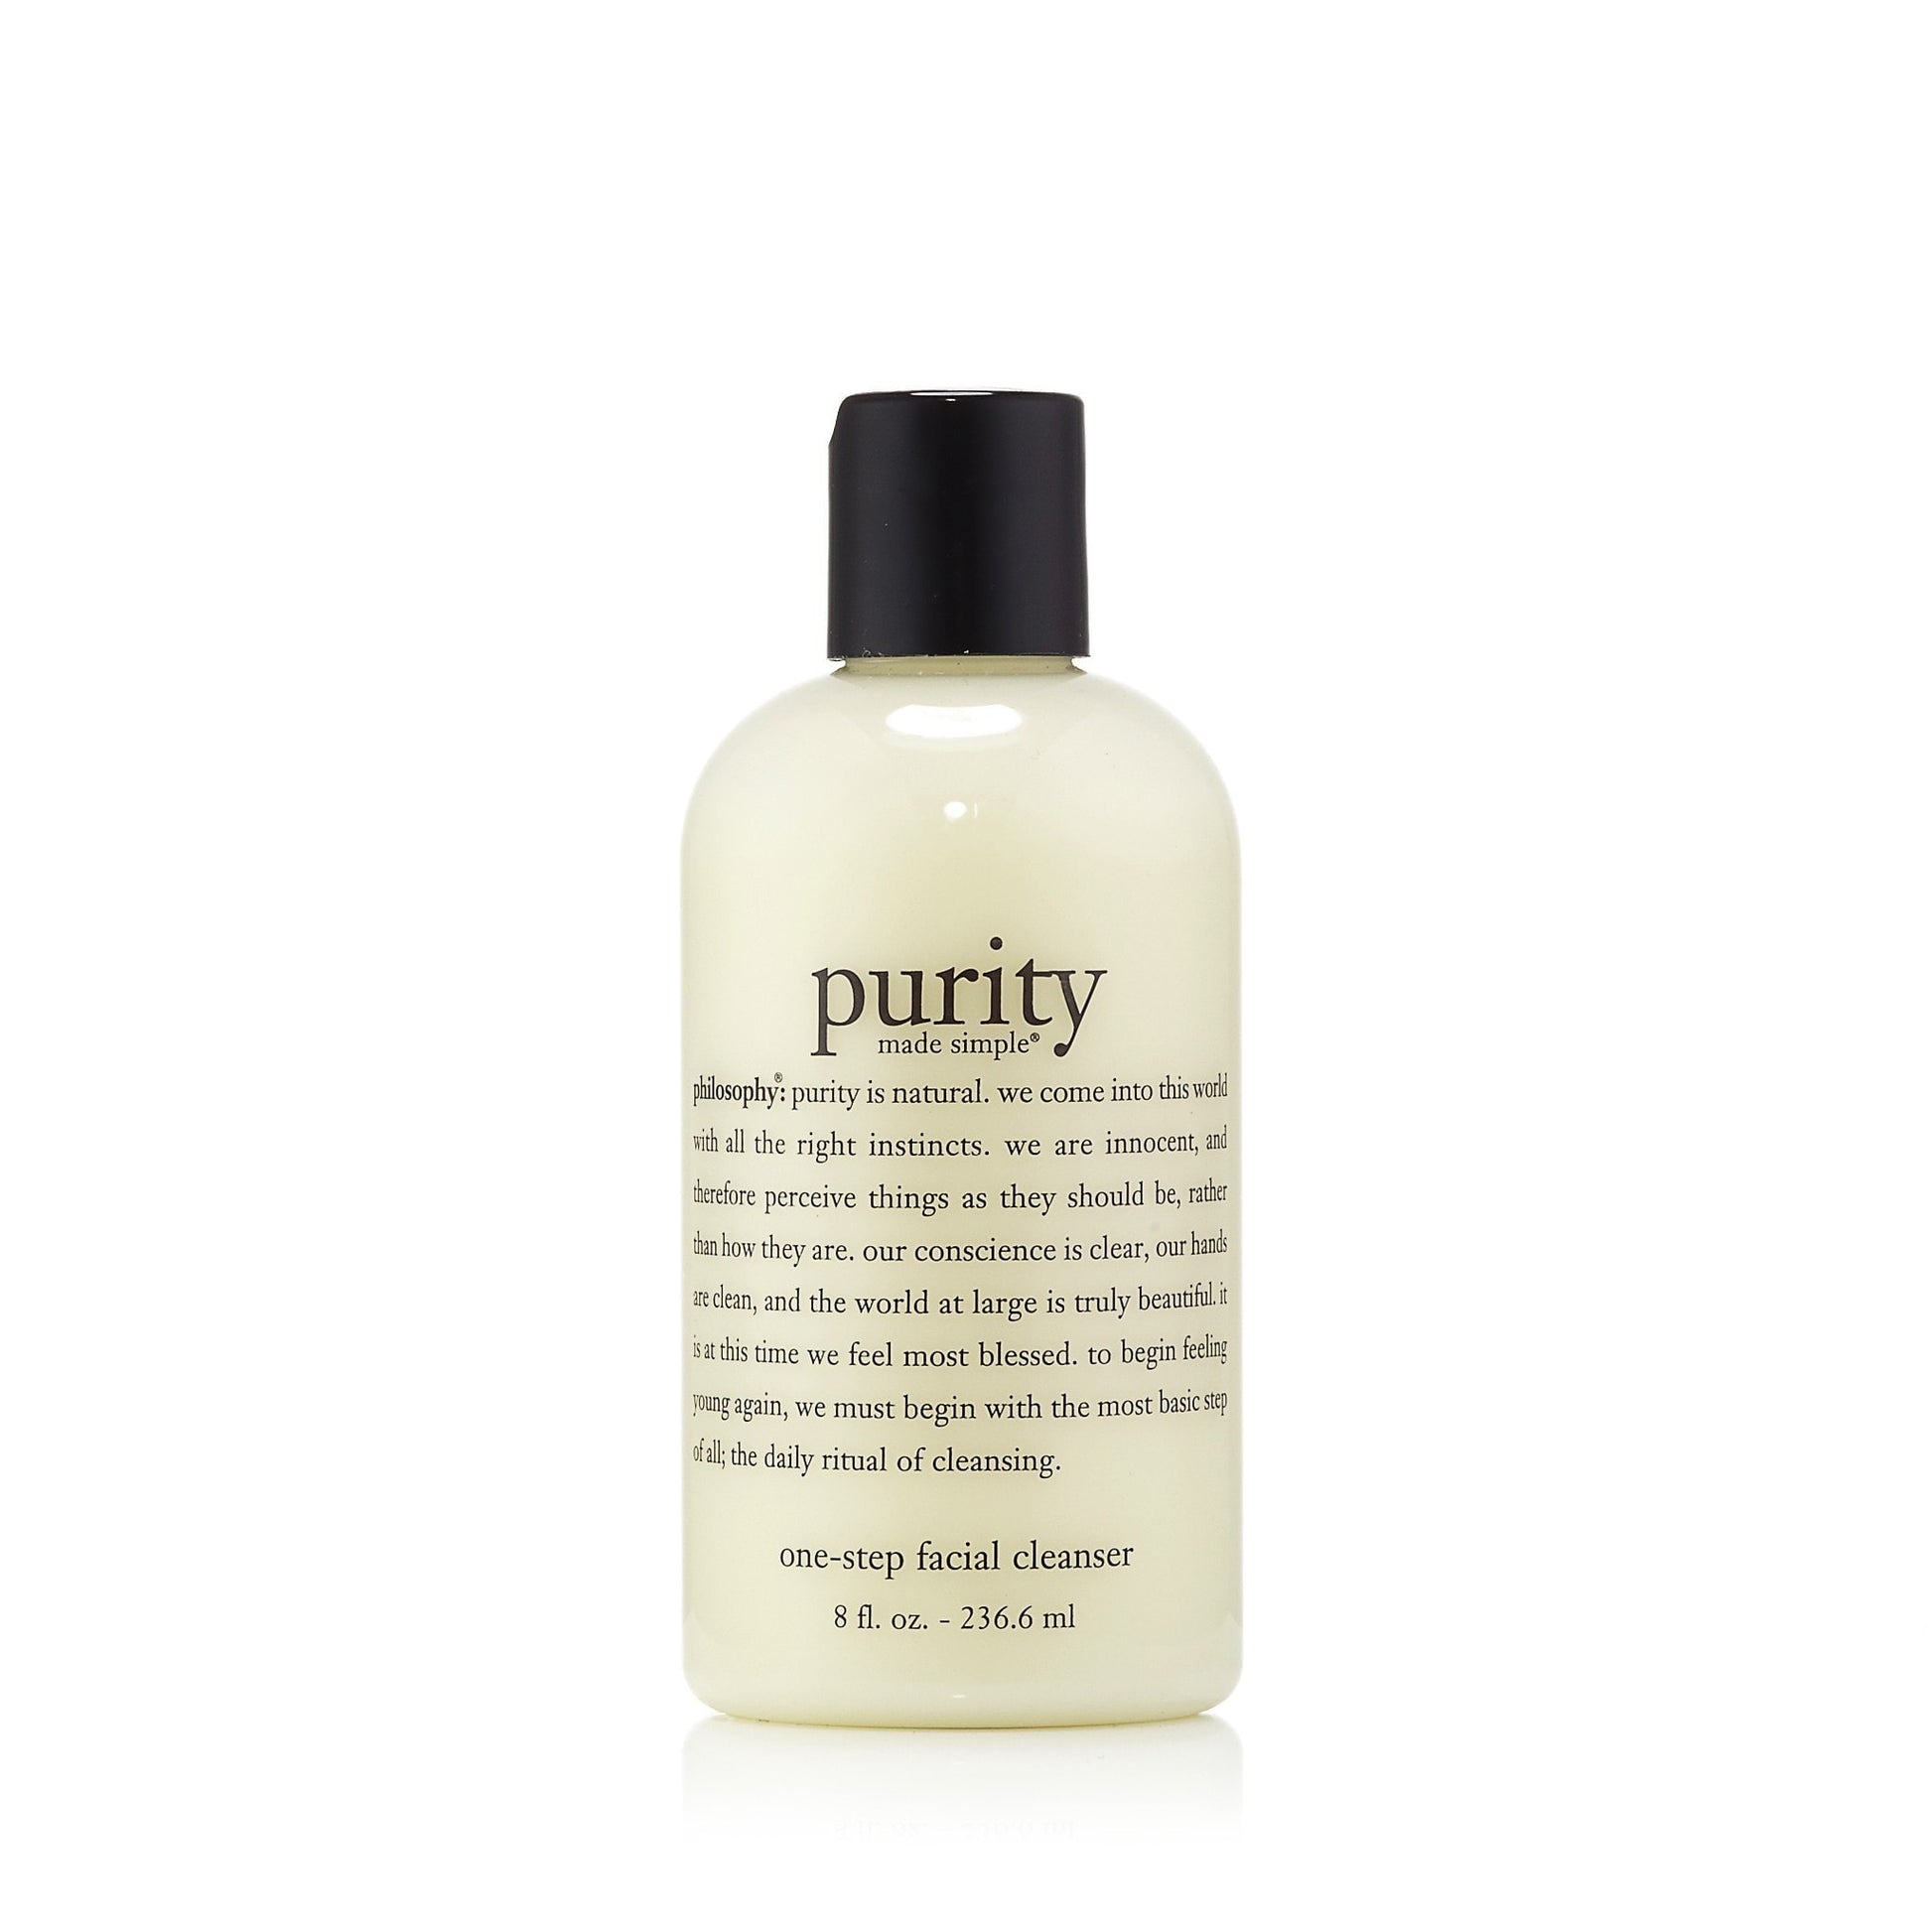 Purity Made Simple One Step Facial Cleanser by Philosophy 8.0 oz. Click to open in modal